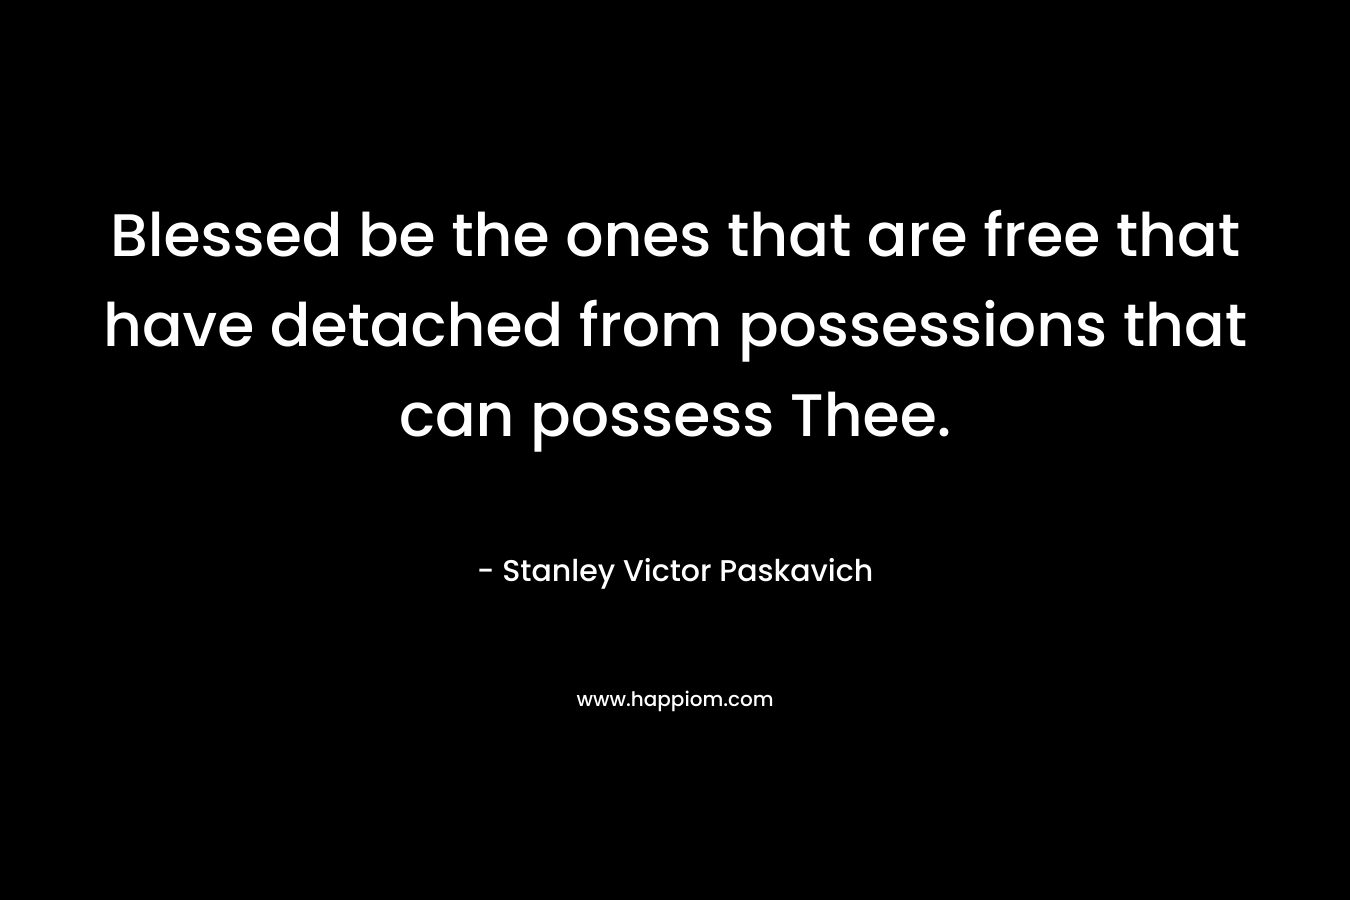 Blessed be the ones that are free that have detached from possessions that can possess Thee.